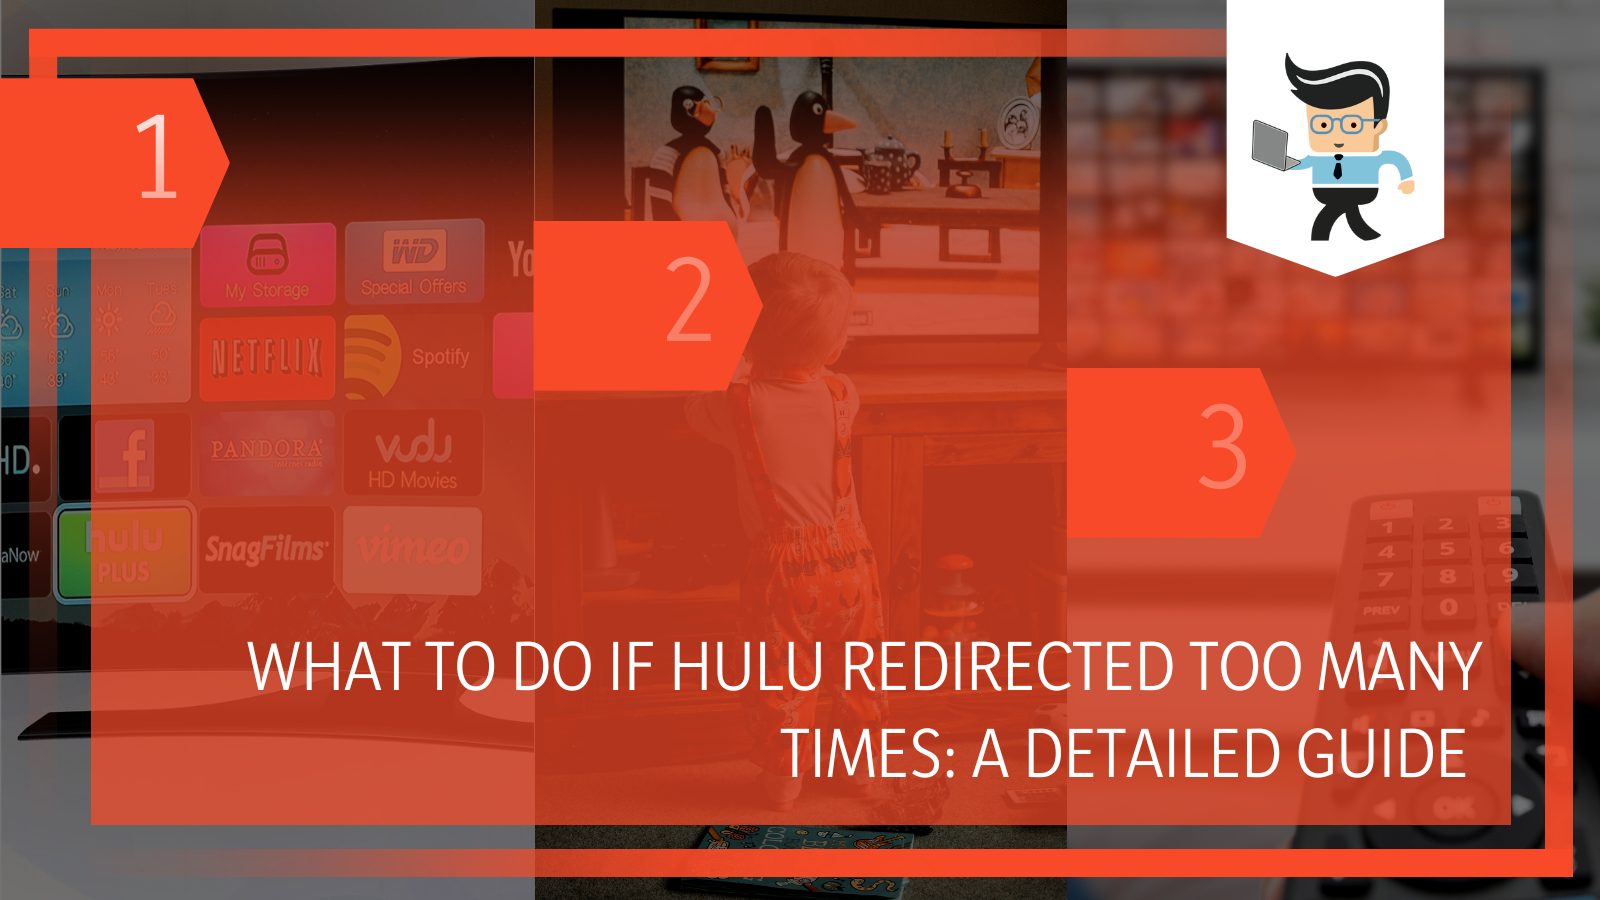 Hulu Redirected Too Many Times